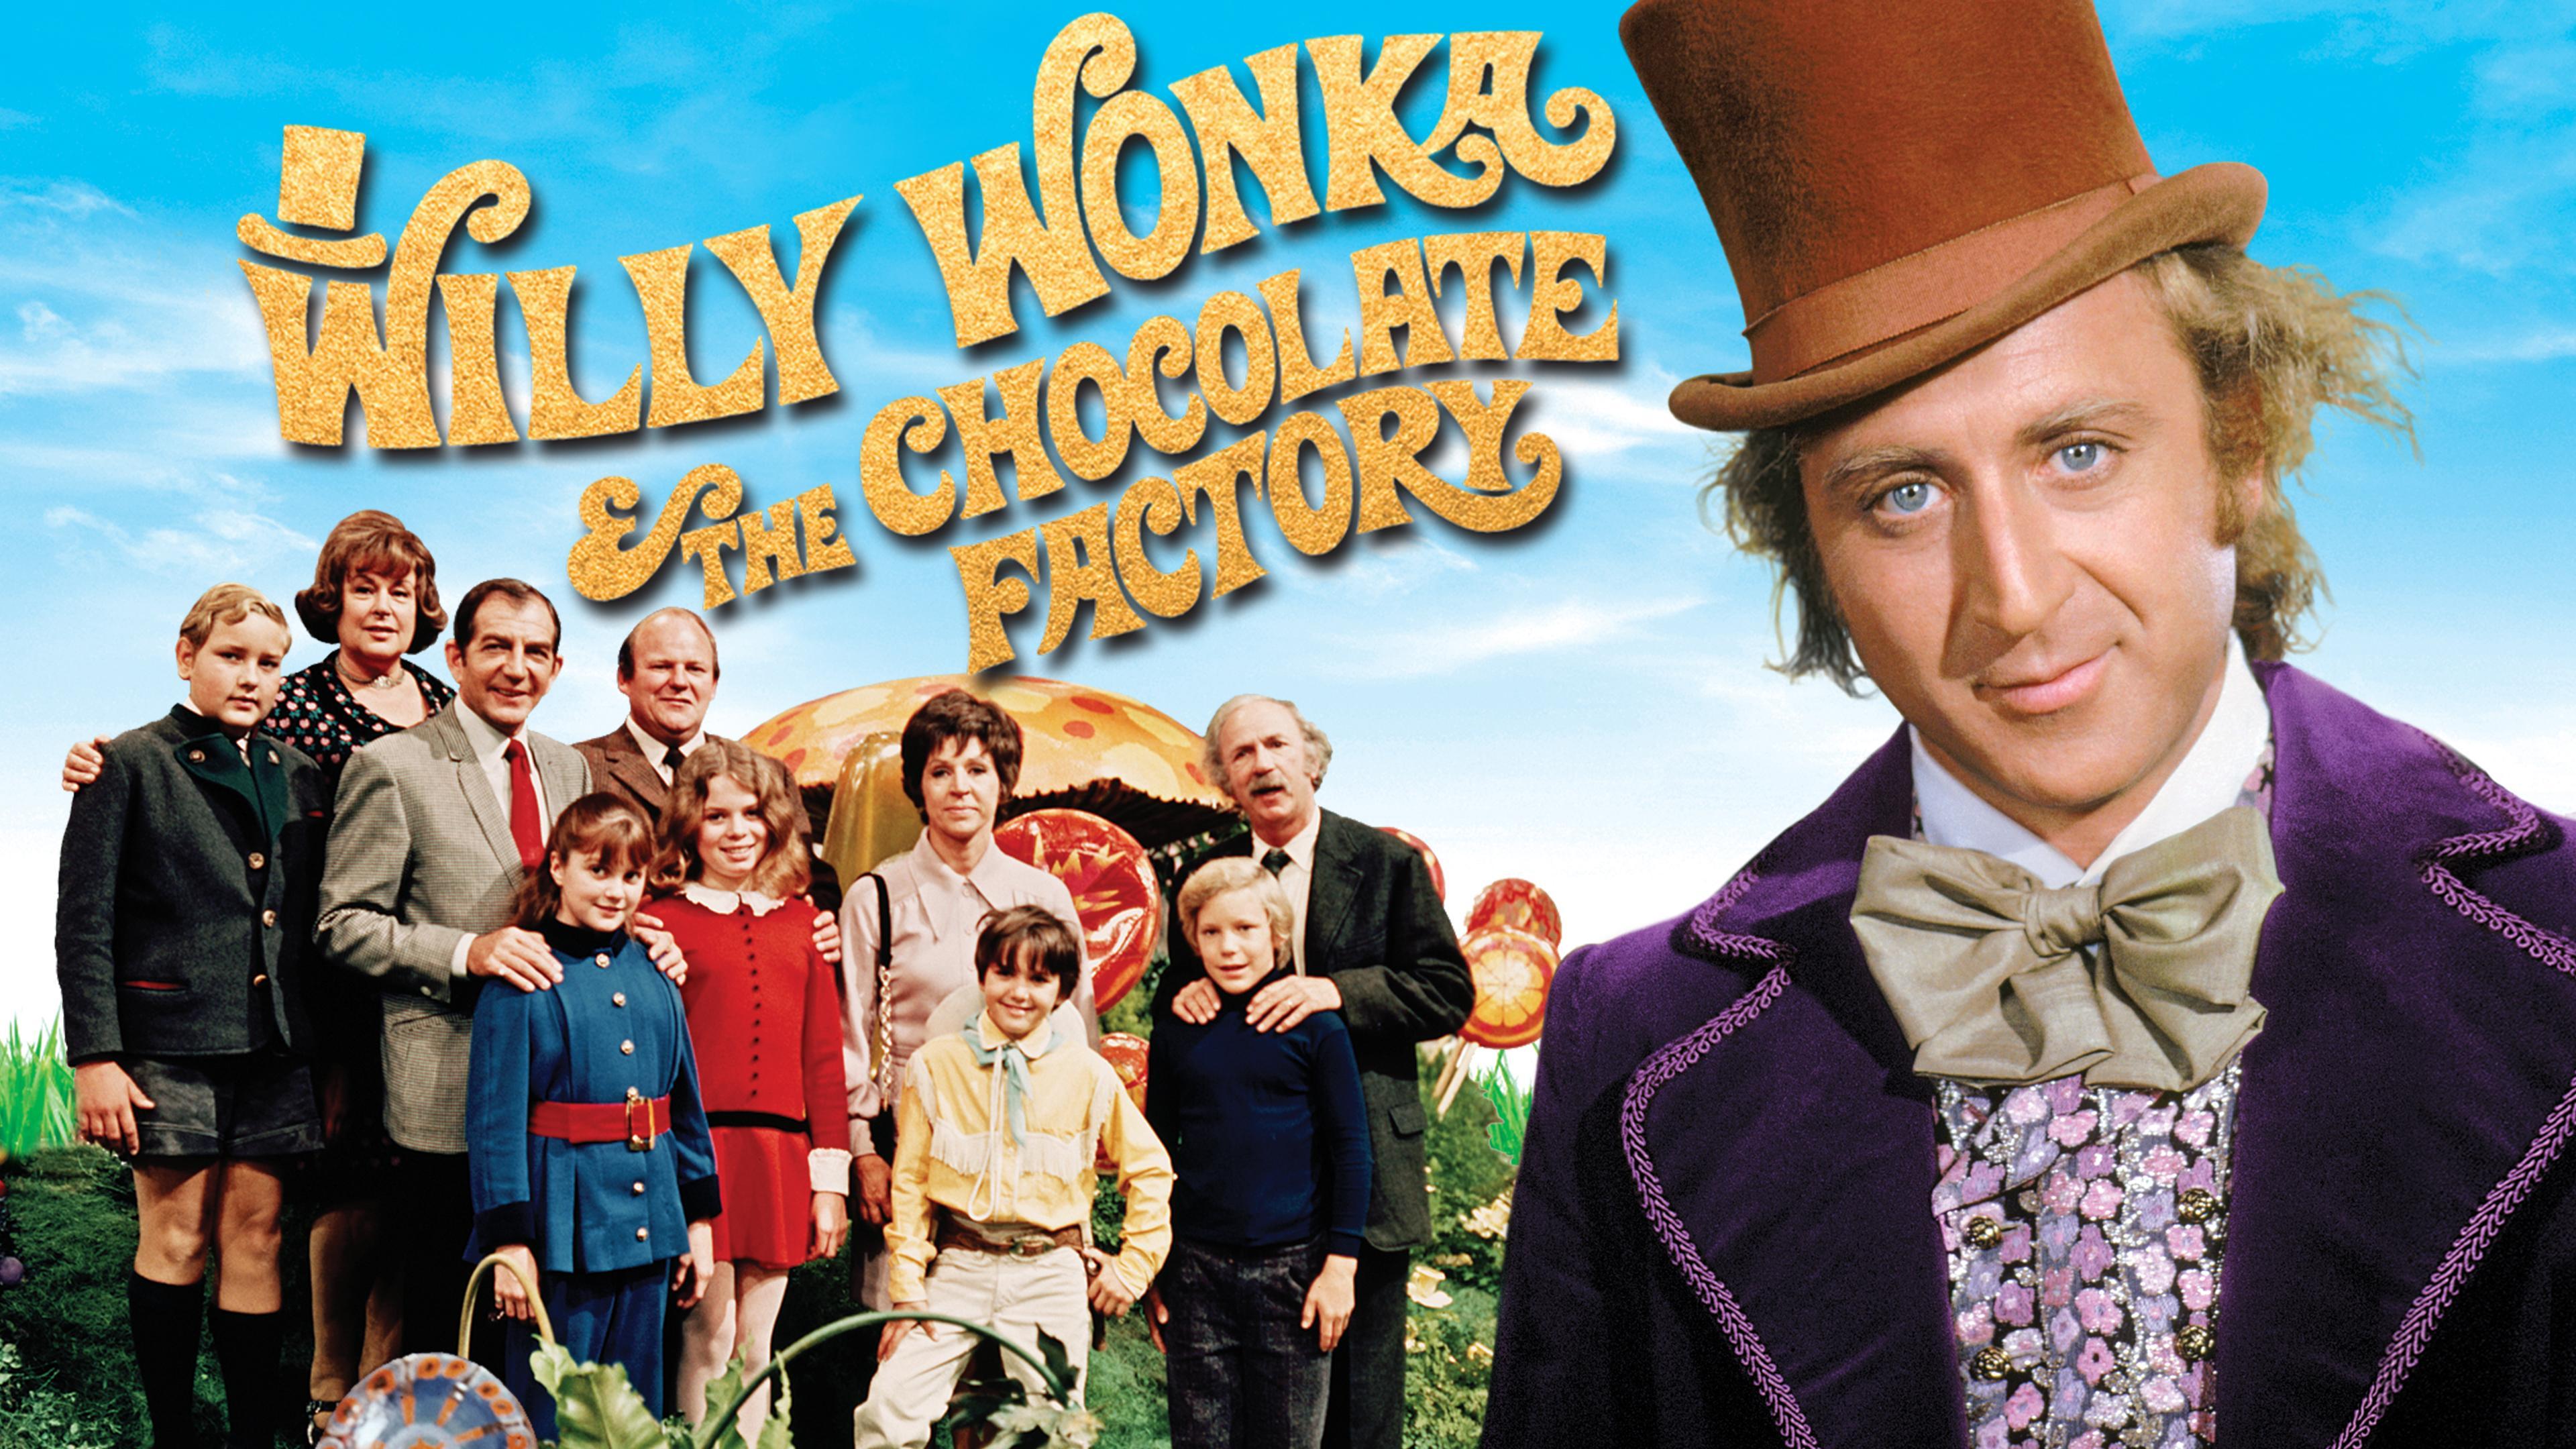 Willy Wonka & the Chocolate Factory - Movie - Where To Watch